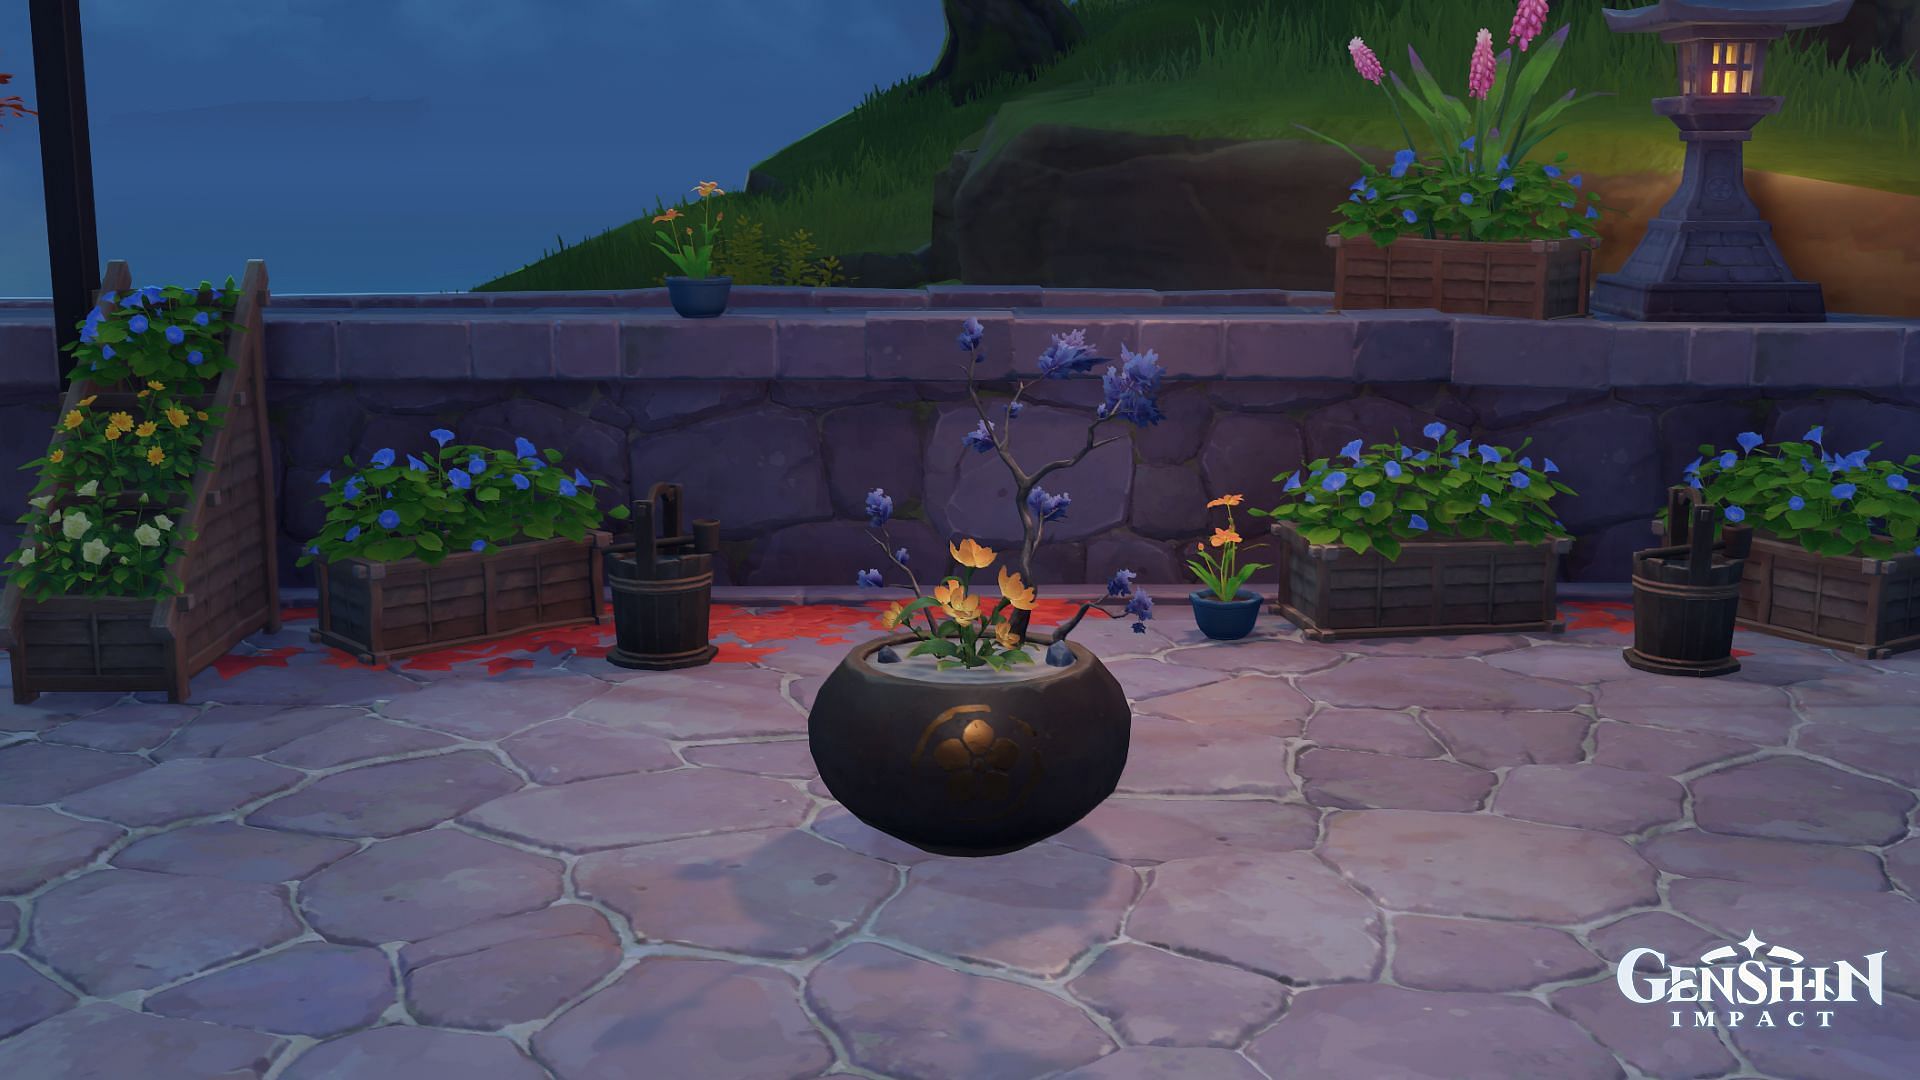 Genshin Impact Floral Courtyard guide (Day 1): How to construct Floral theme